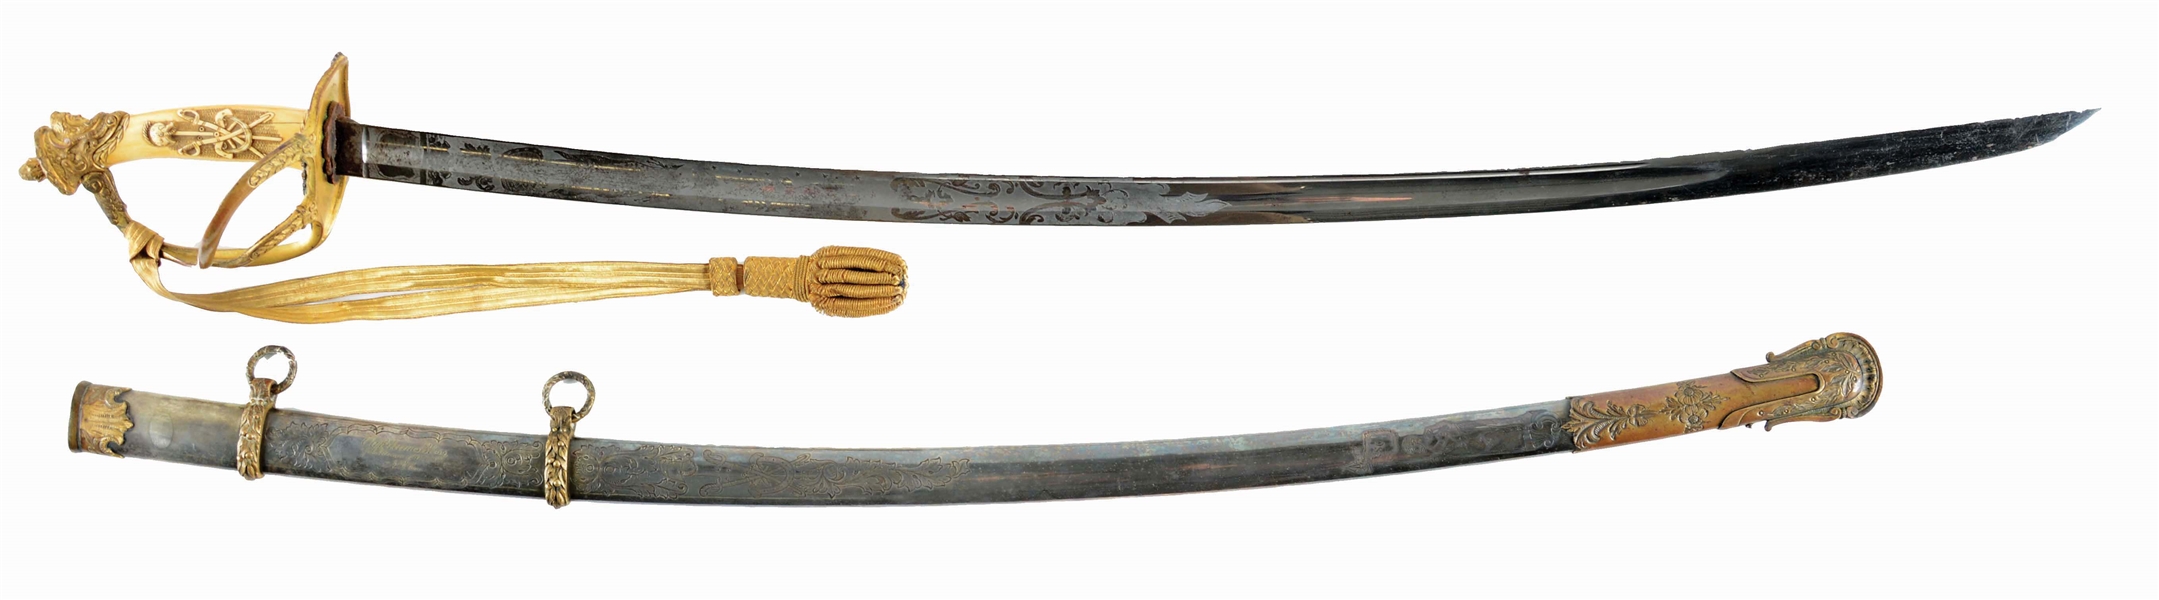 A RARE AND HISTORICALLY IMPORTANT CIVIL WAR SABER WITH RAISED CARVED IVORY GRIP AND SILVER SCABBARD PRESENTED TO CAPTAIN JAMES BLISS FROM VETEARNS OF COMPANY B, 8TH NEW YORK CAVALRY.